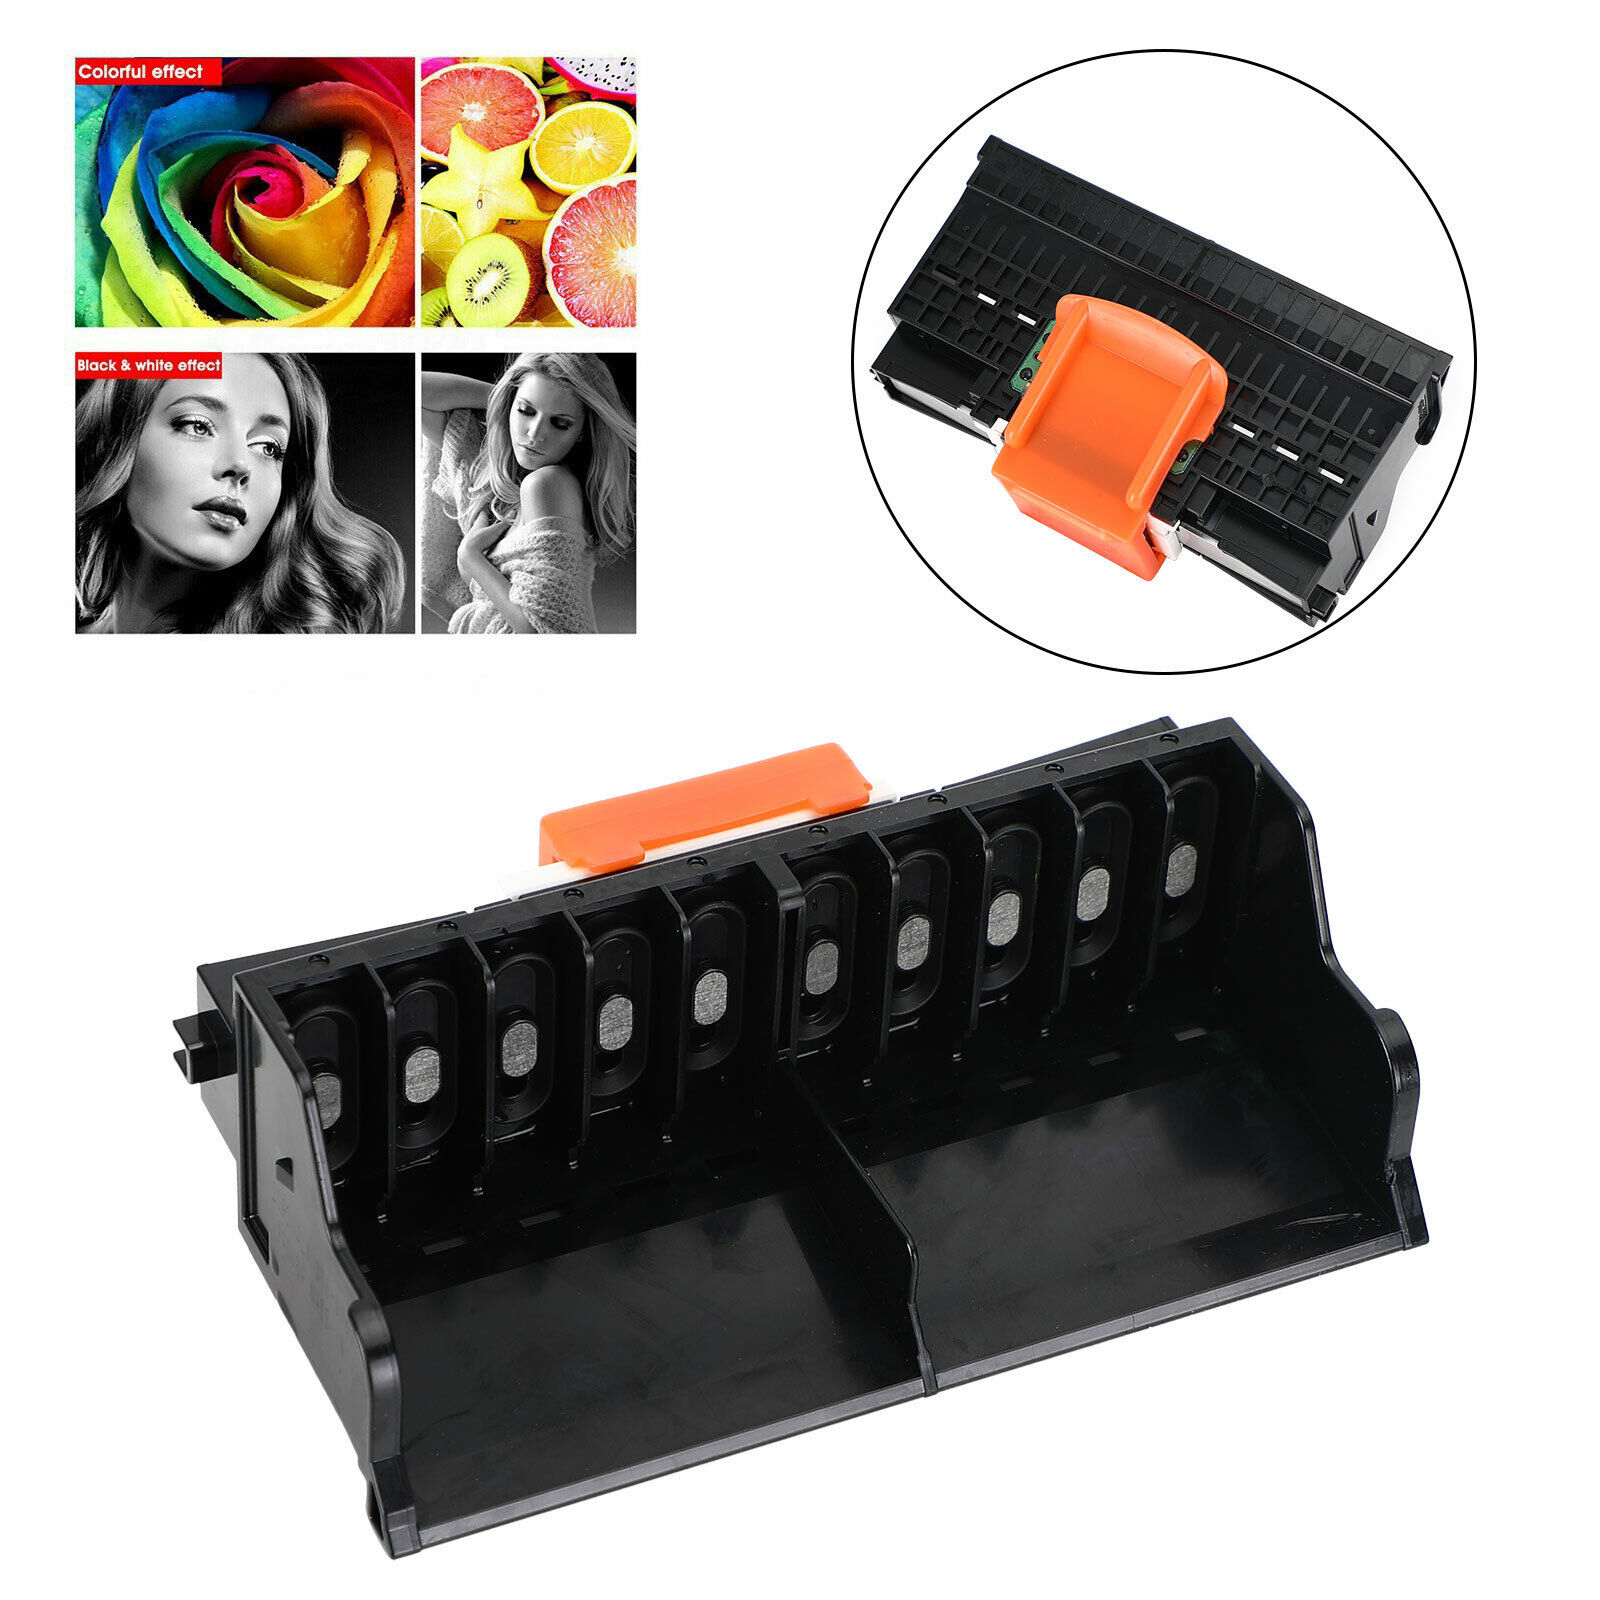 Full Color PrintHead Print Head For Pro10 Pro 10 Pro-10 QY6-0085 USA